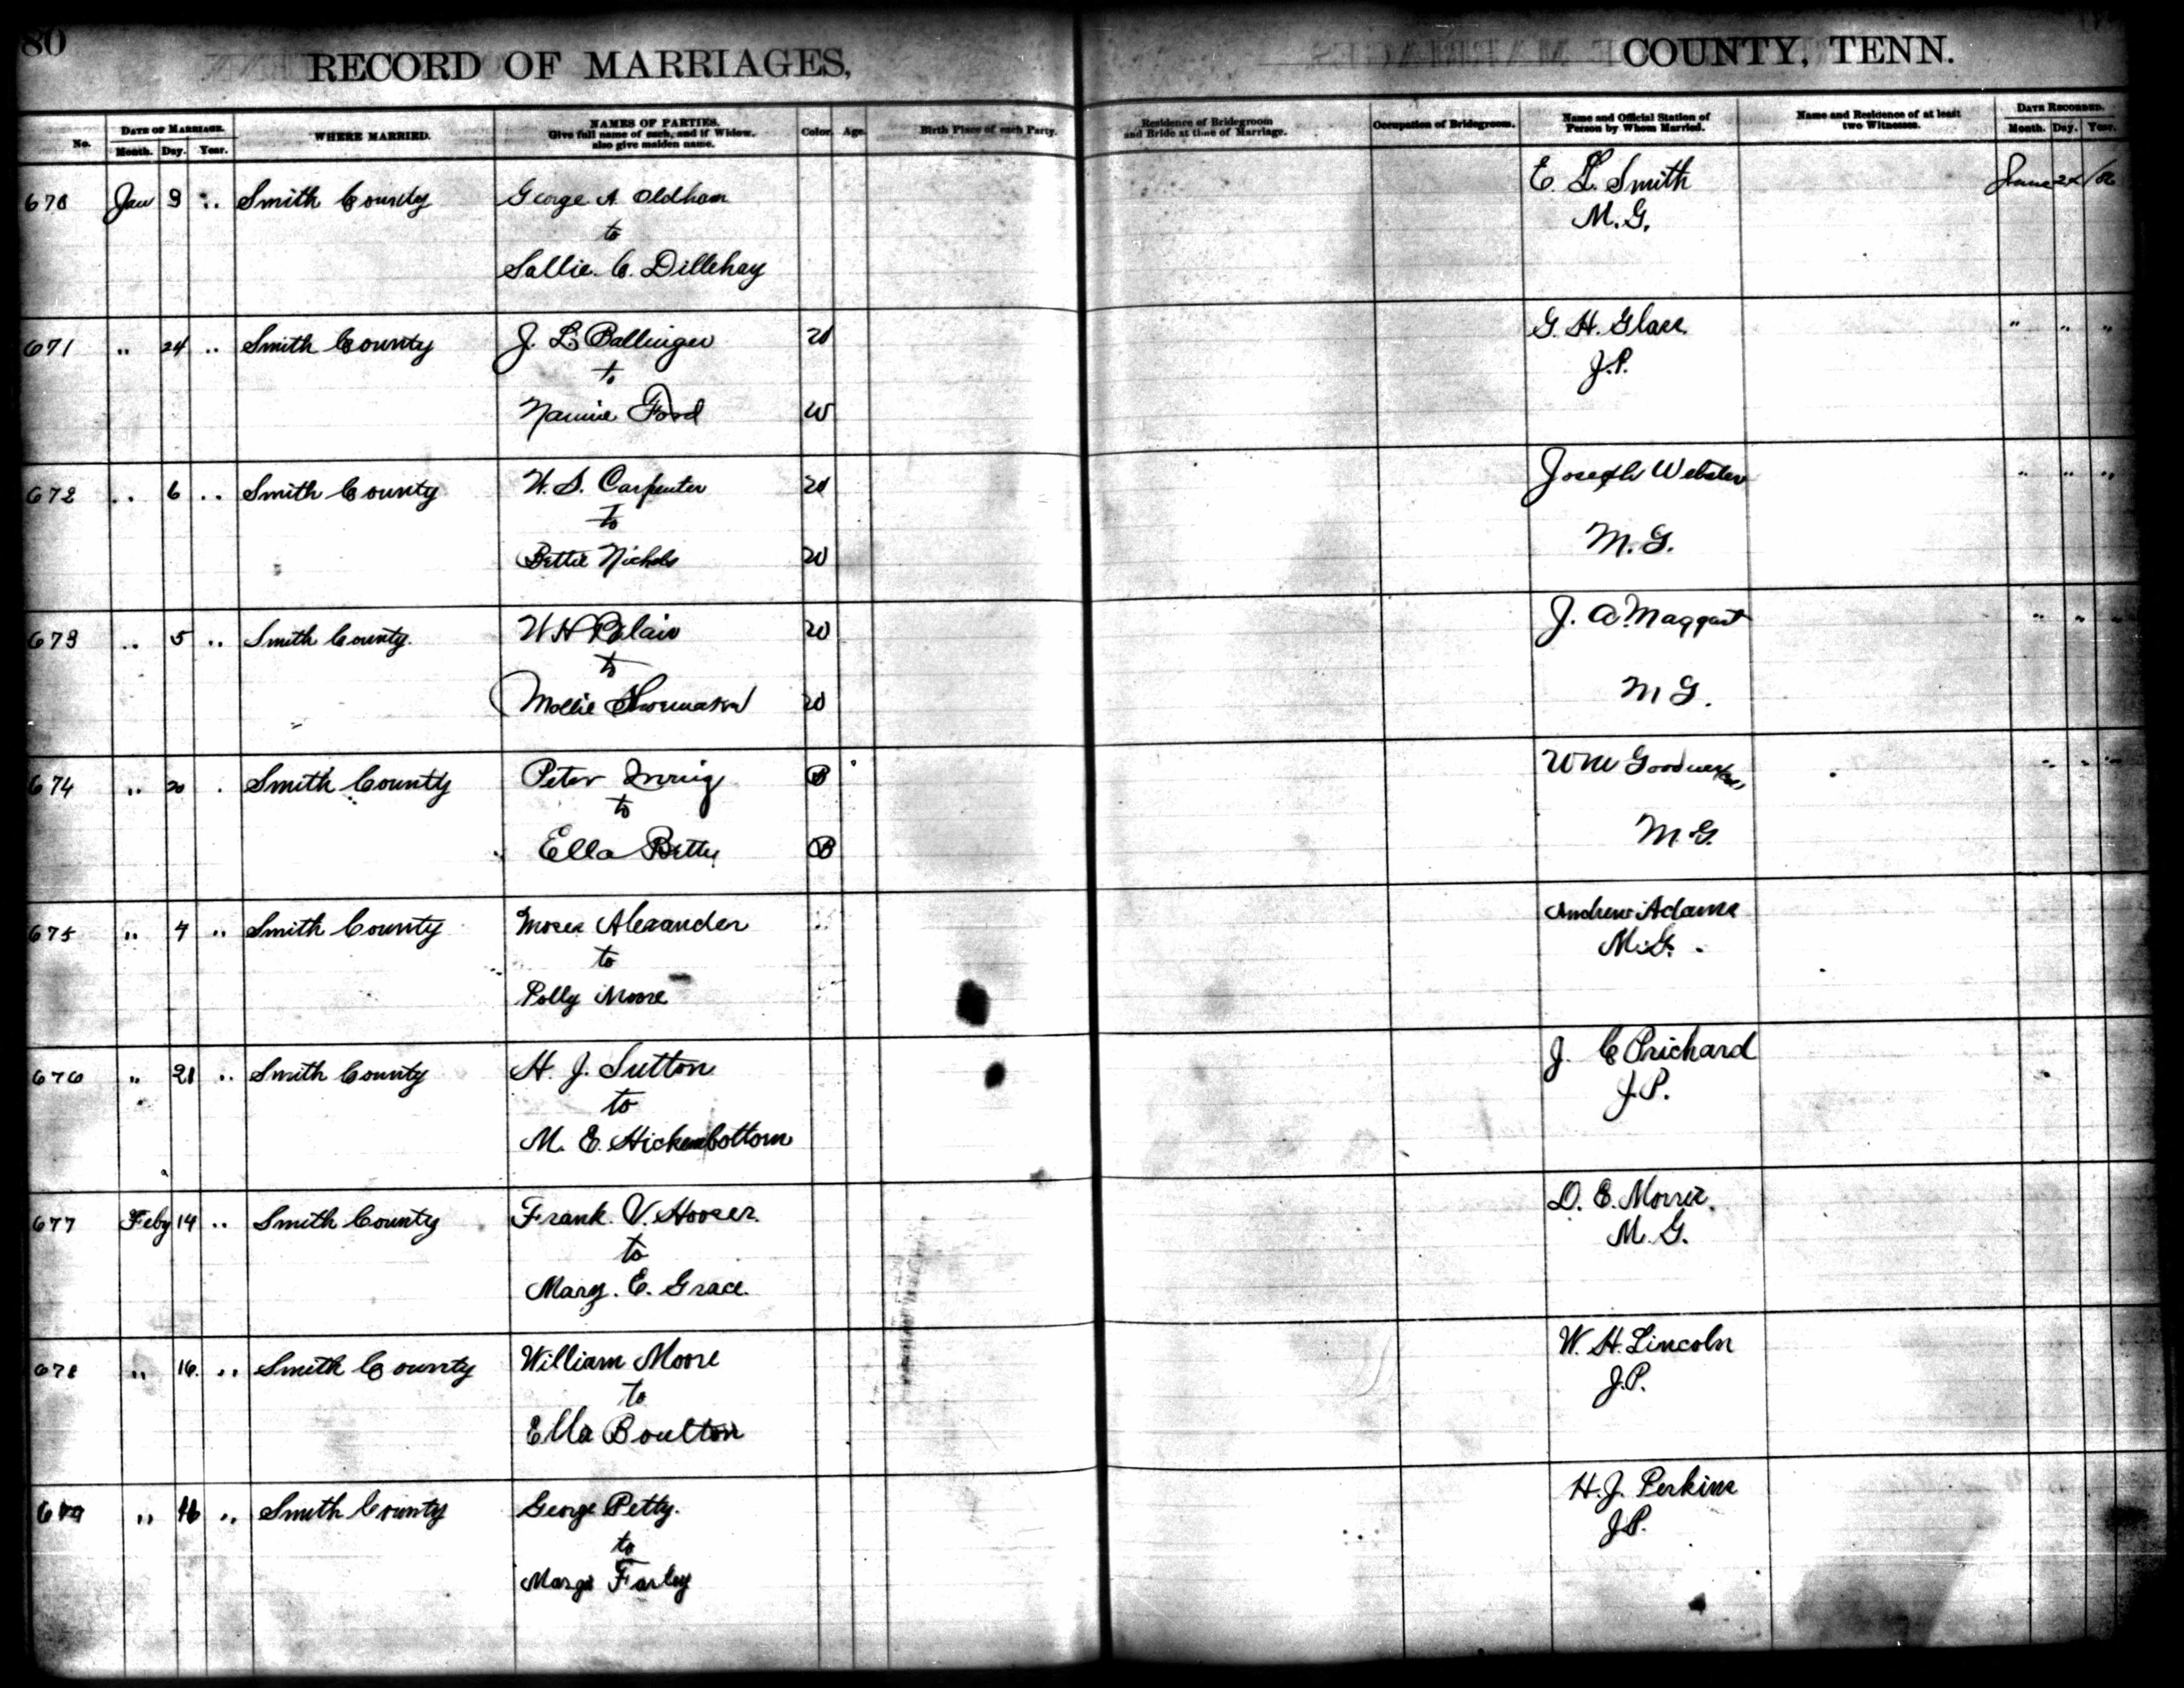 http://edwards-moore-family.net/misc_files/william_johnson_moore/bolton_moore_record_of_marriage.jpg